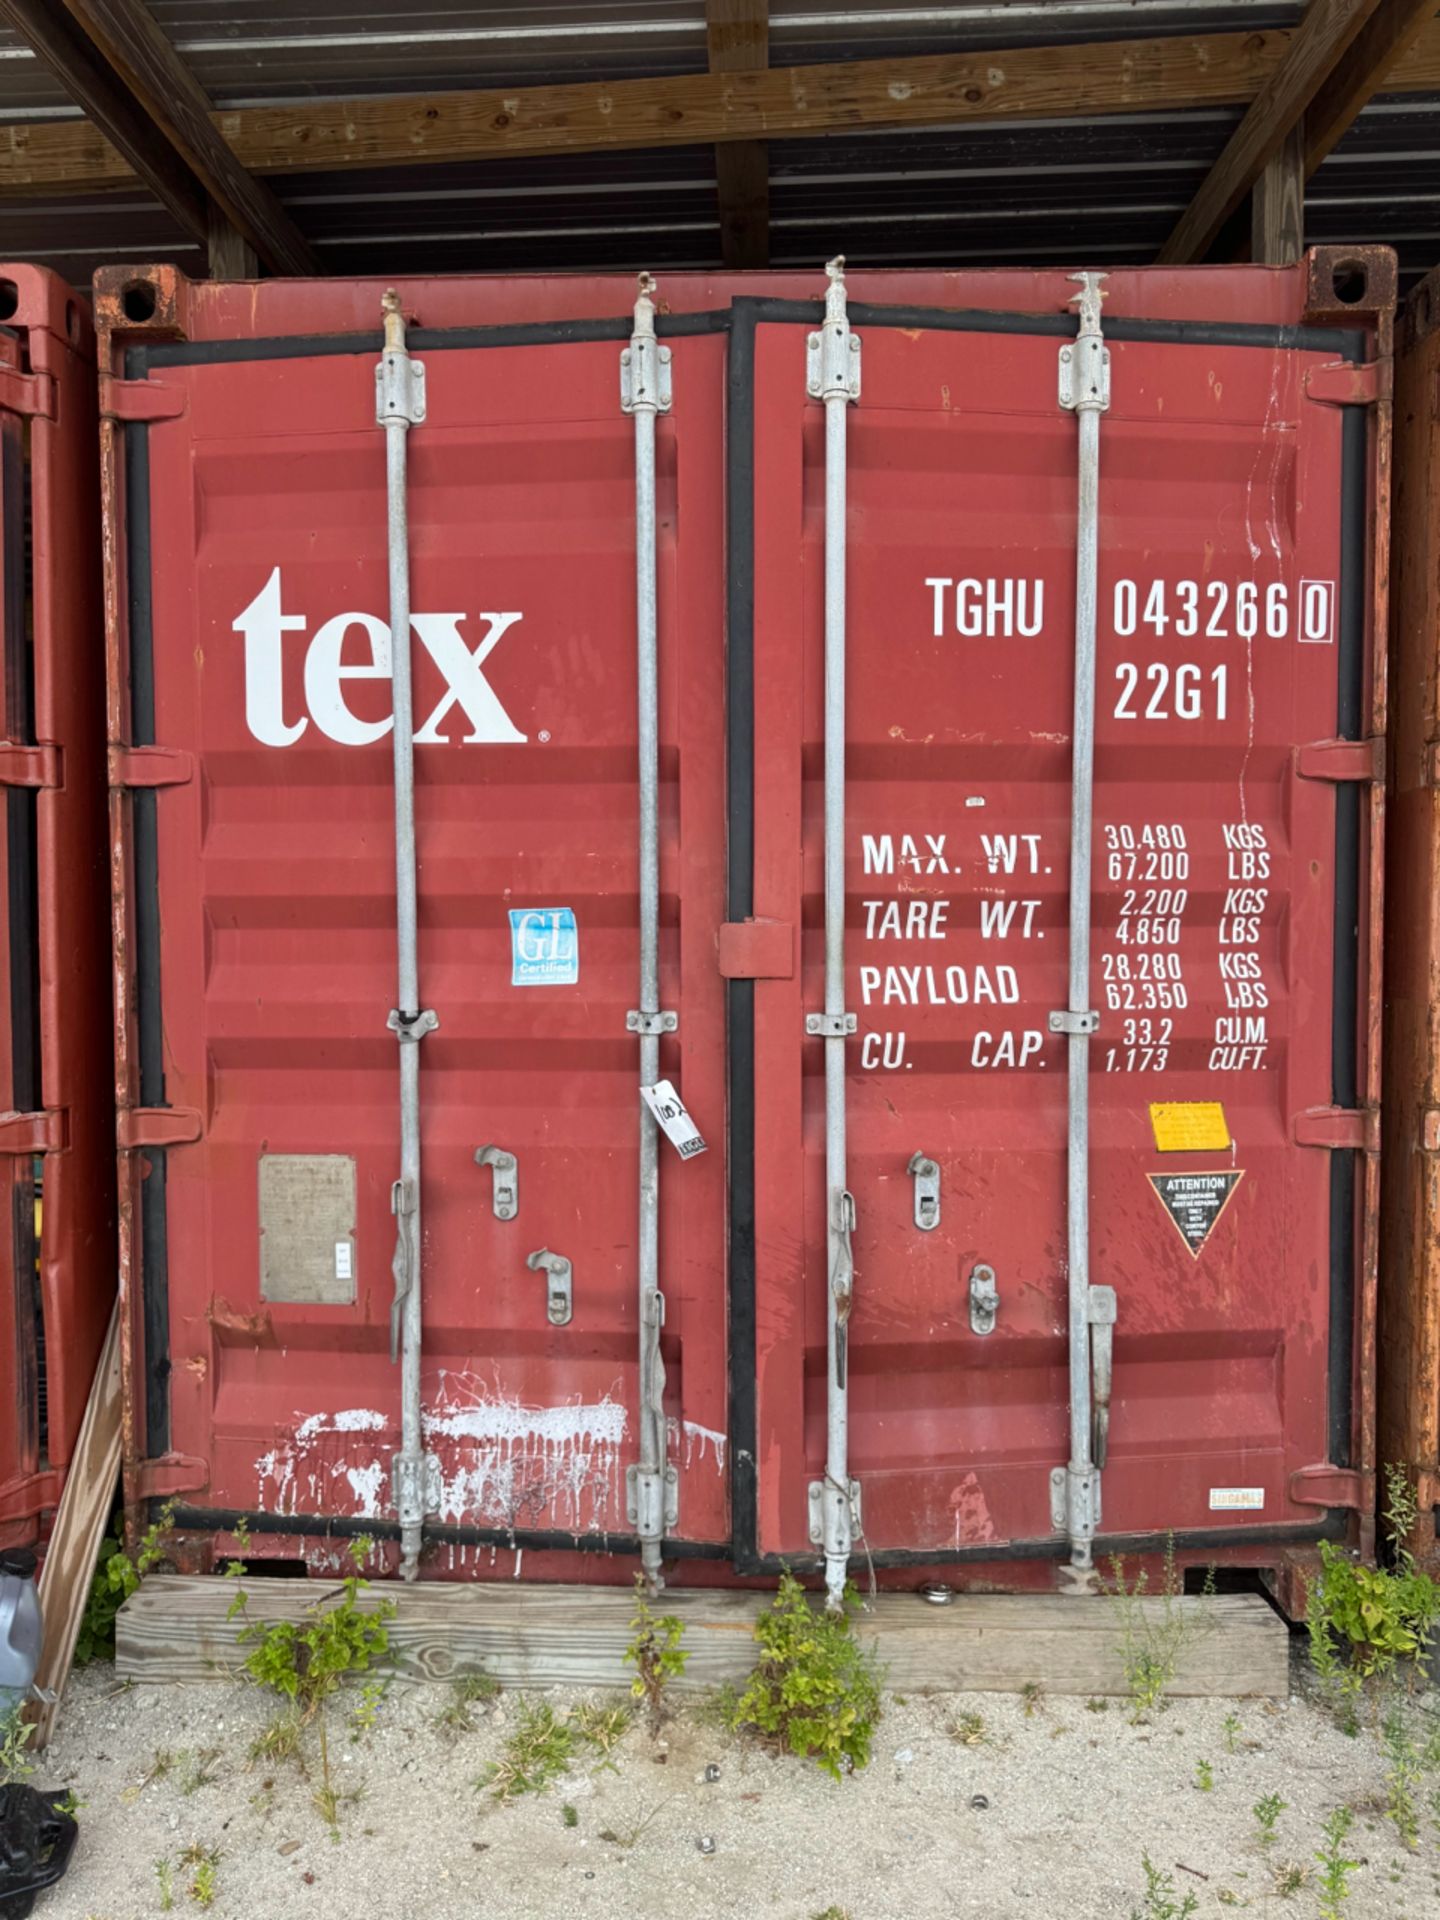 Lot 20' Shipping Container